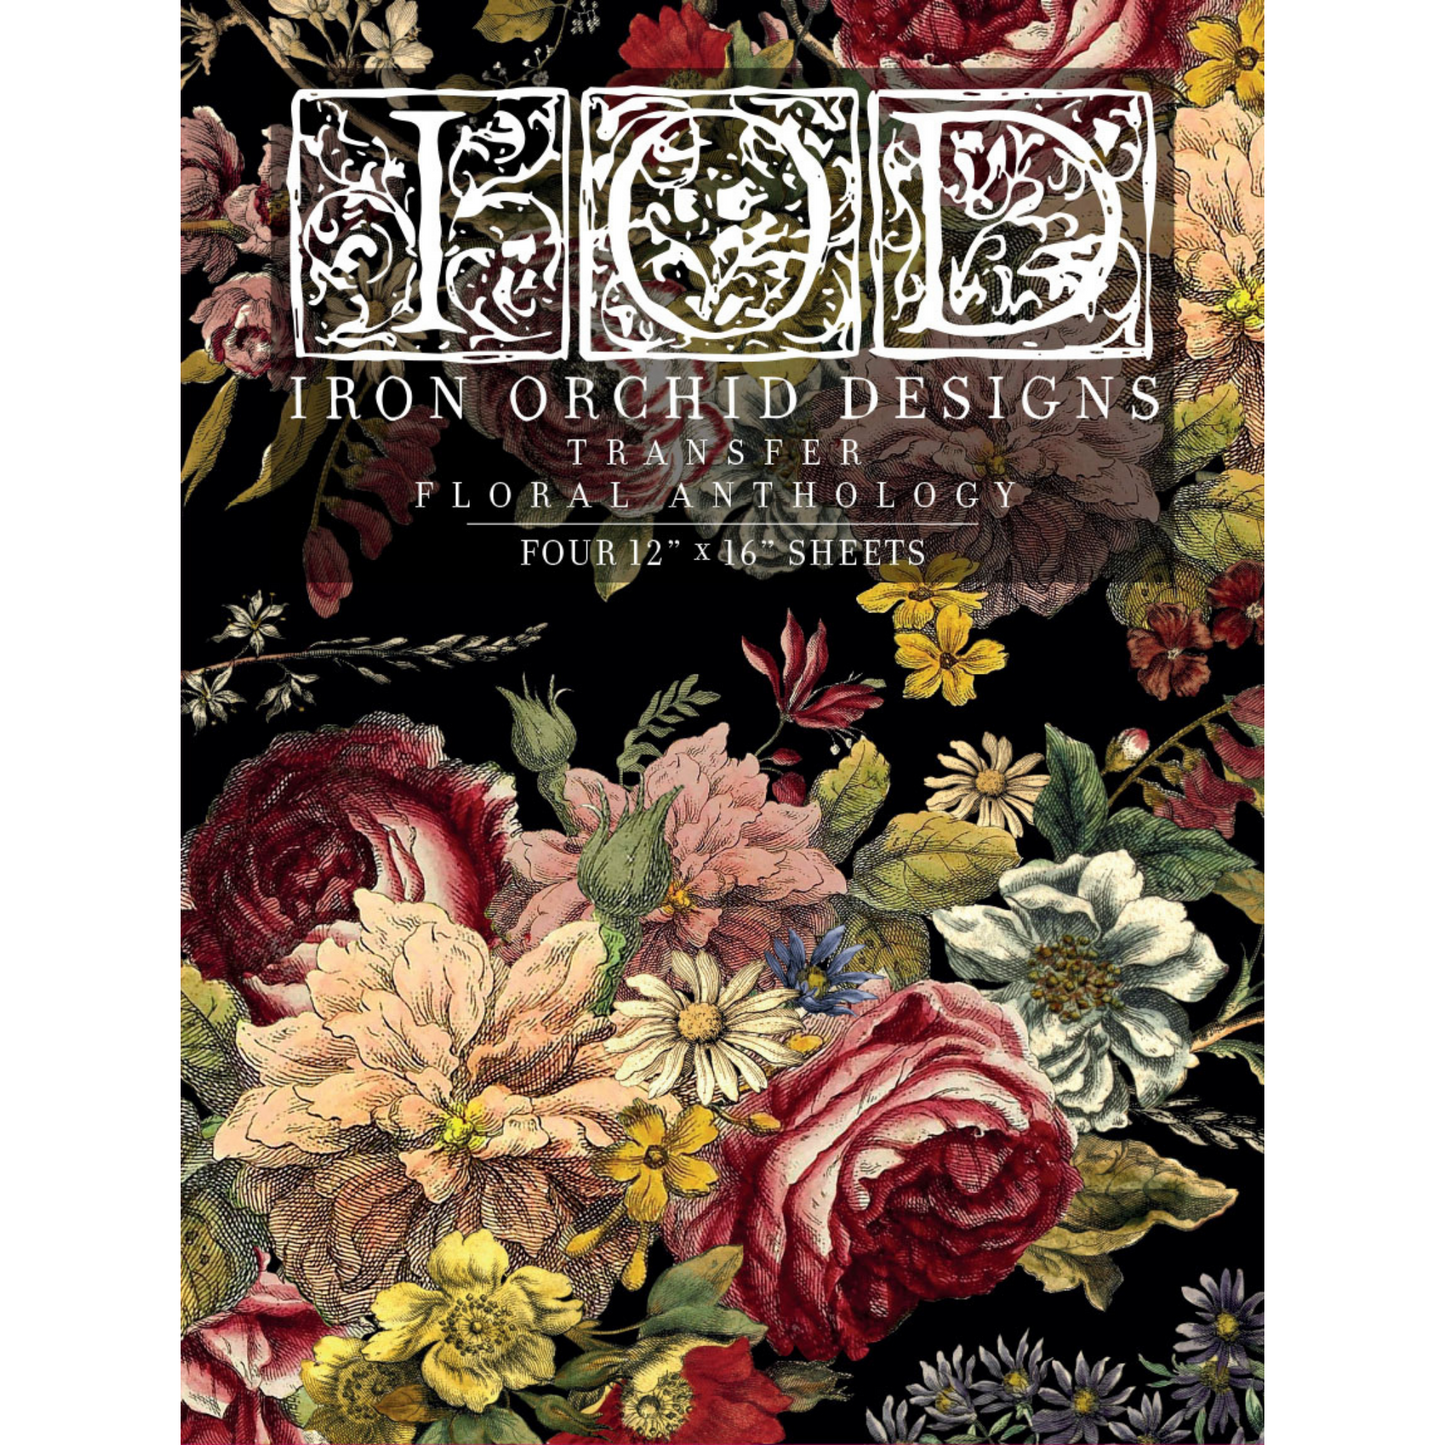 Floral Anthology IOD Transfer; product cover photo of multi floral bouquets emulating tapestry design at Milton's Daughter